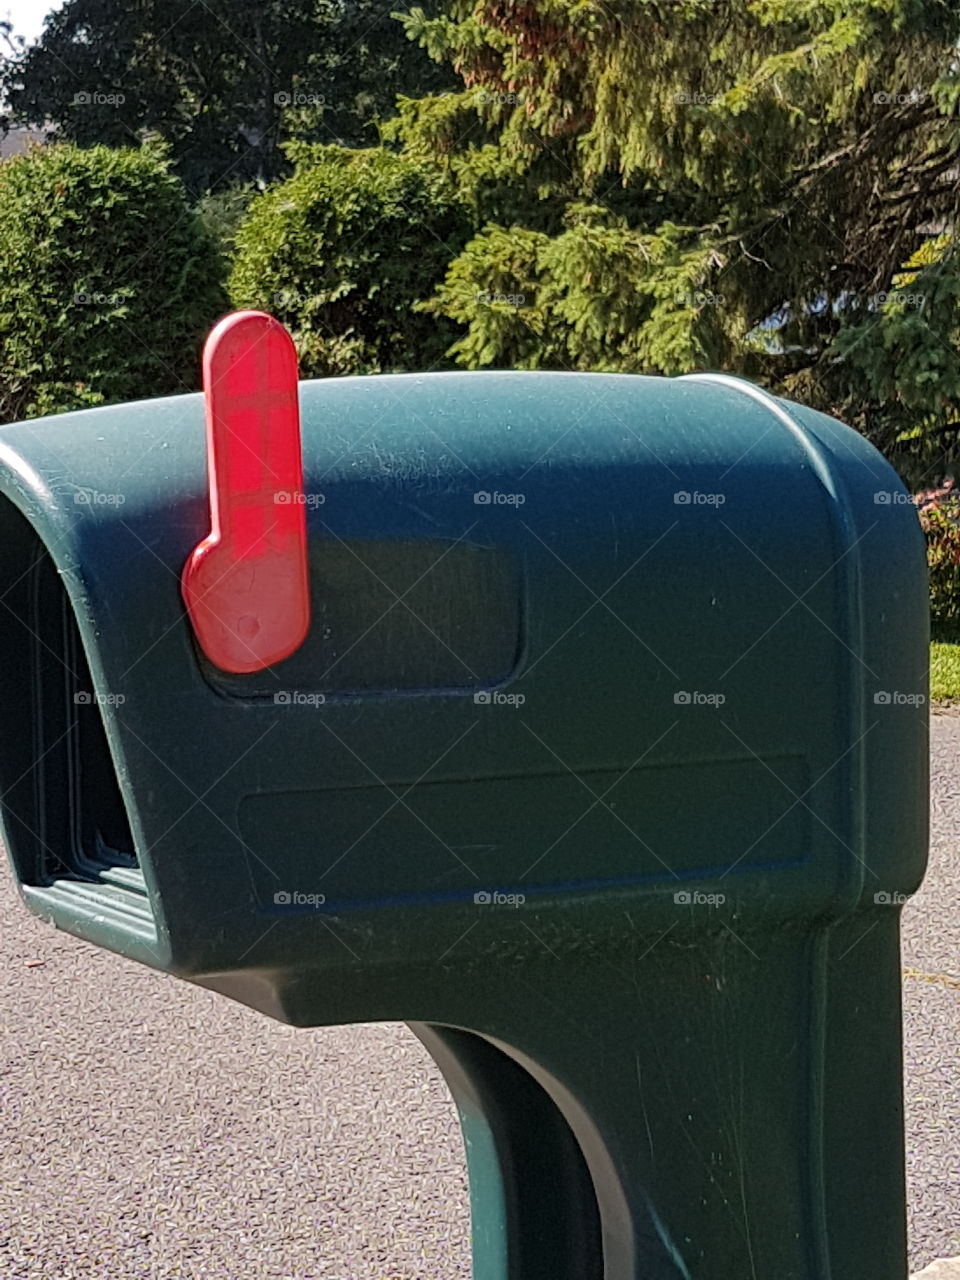 You have Mail